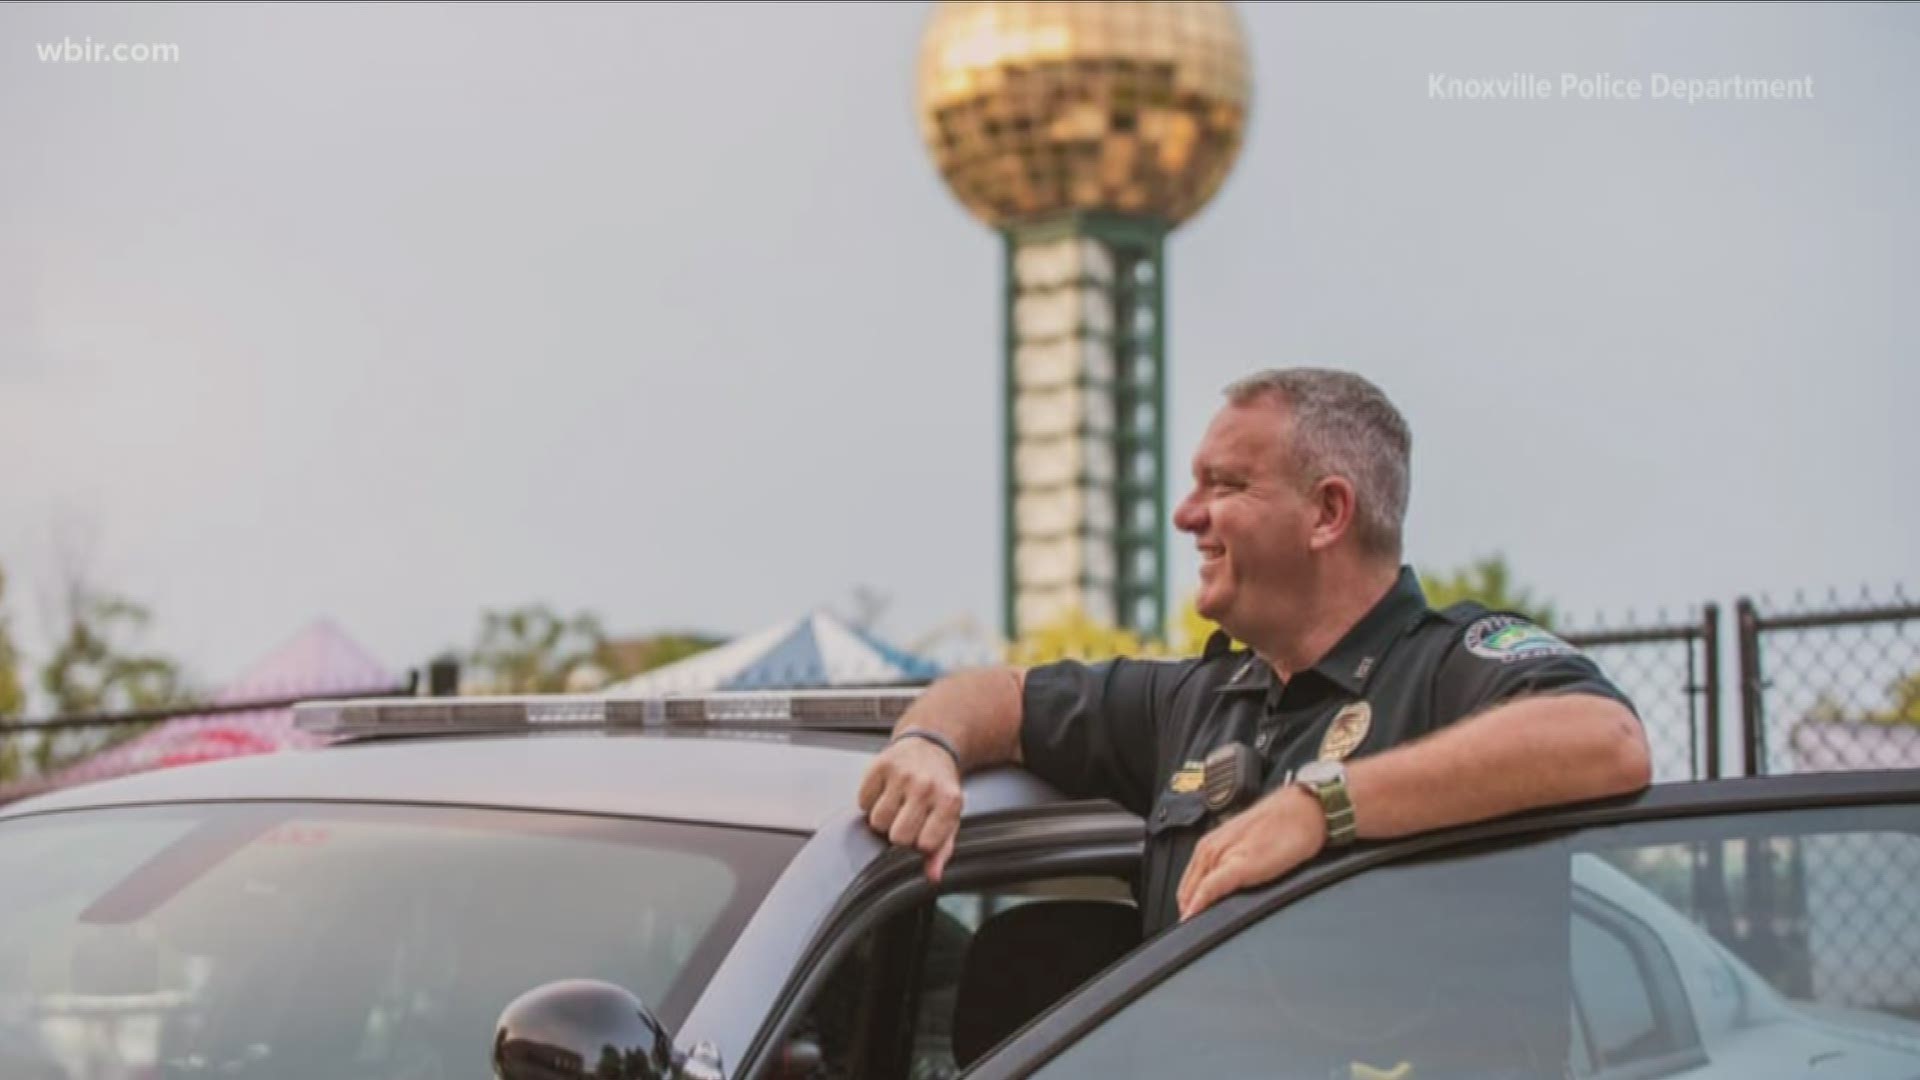 One year after Officer B.K. Hardin was attacked while directing traffic for a UT Football game, KPD continues to look for a suspect.